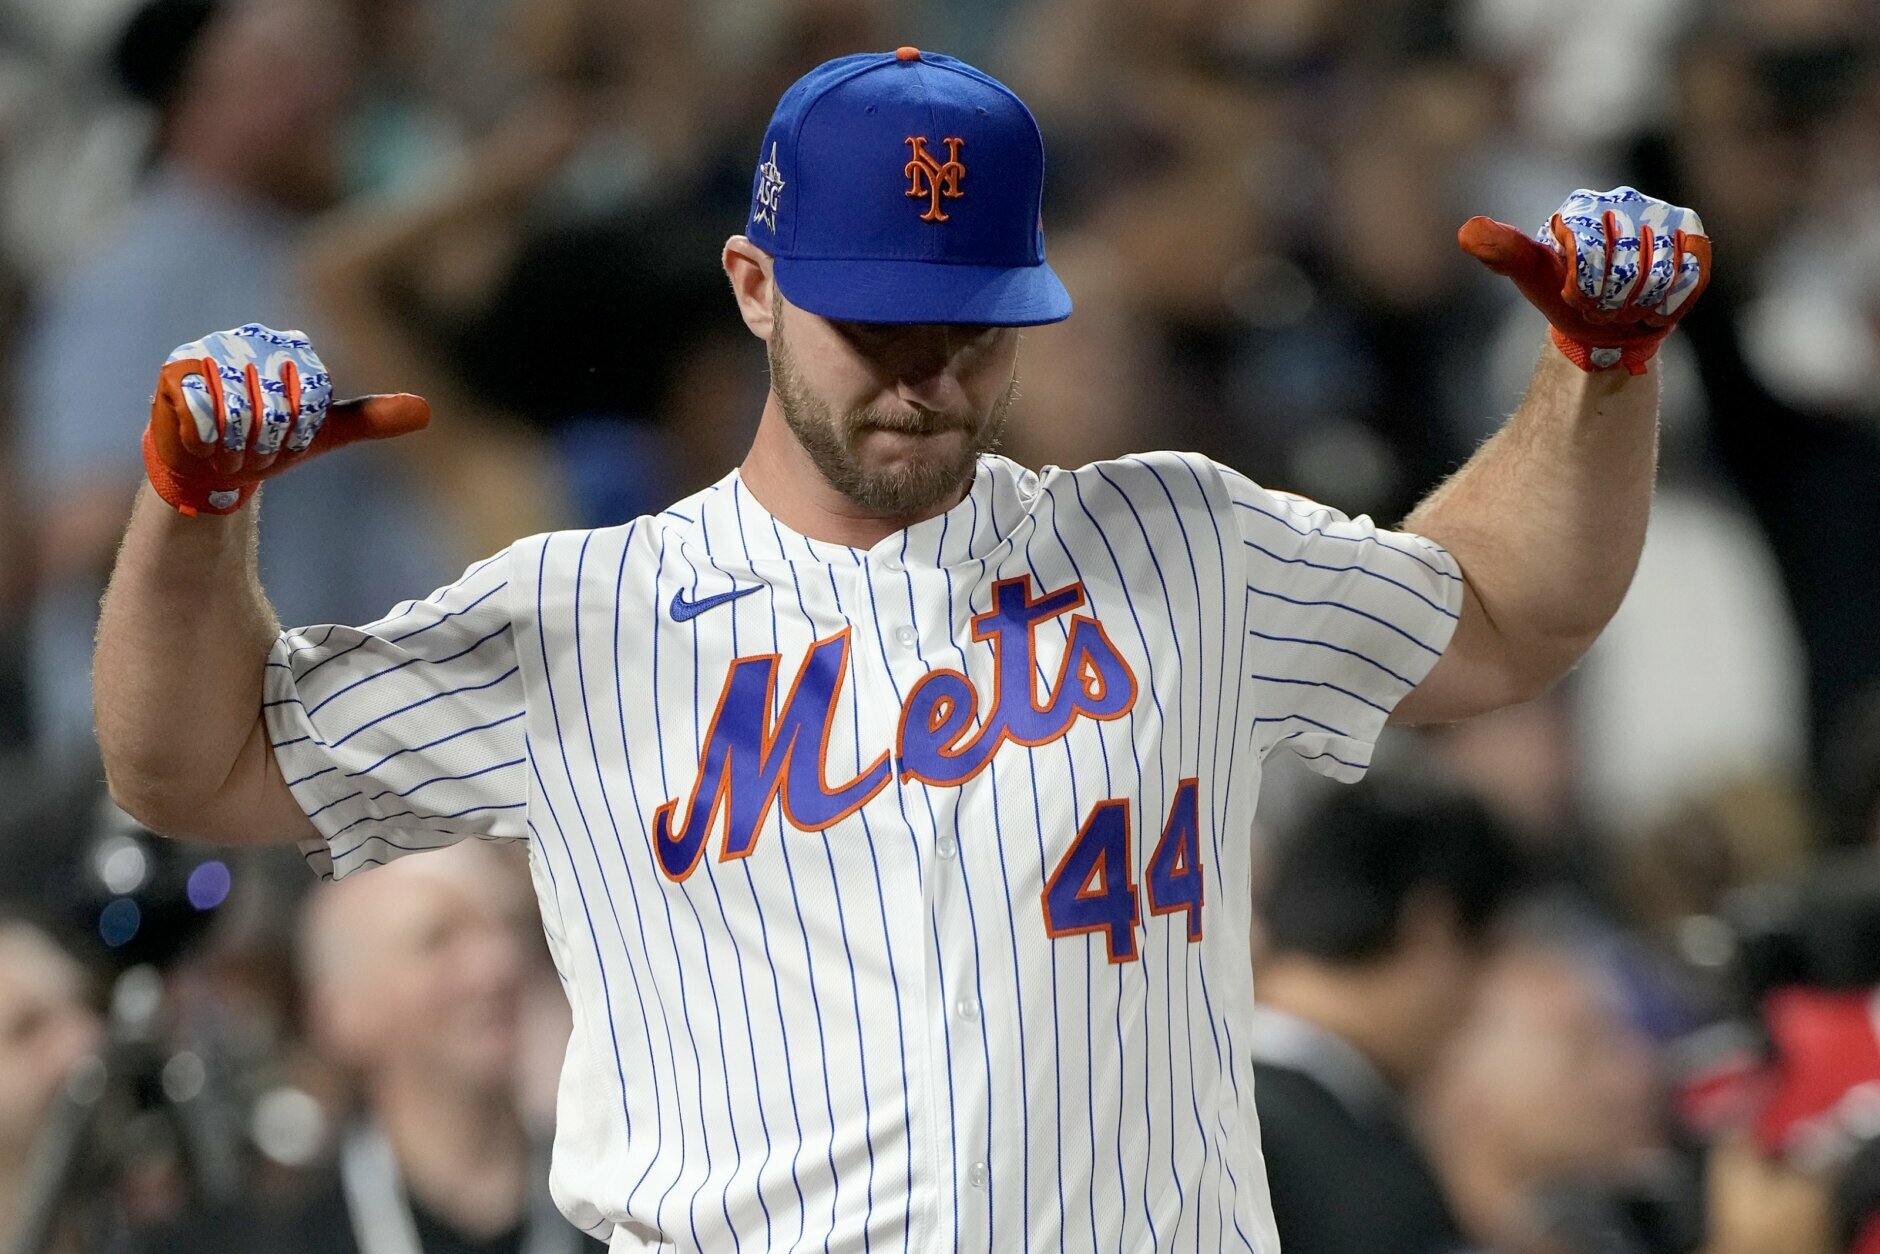 Pete Alonso Home Run Derby Wins Earn Him $2 Million, More Than Mets Contract